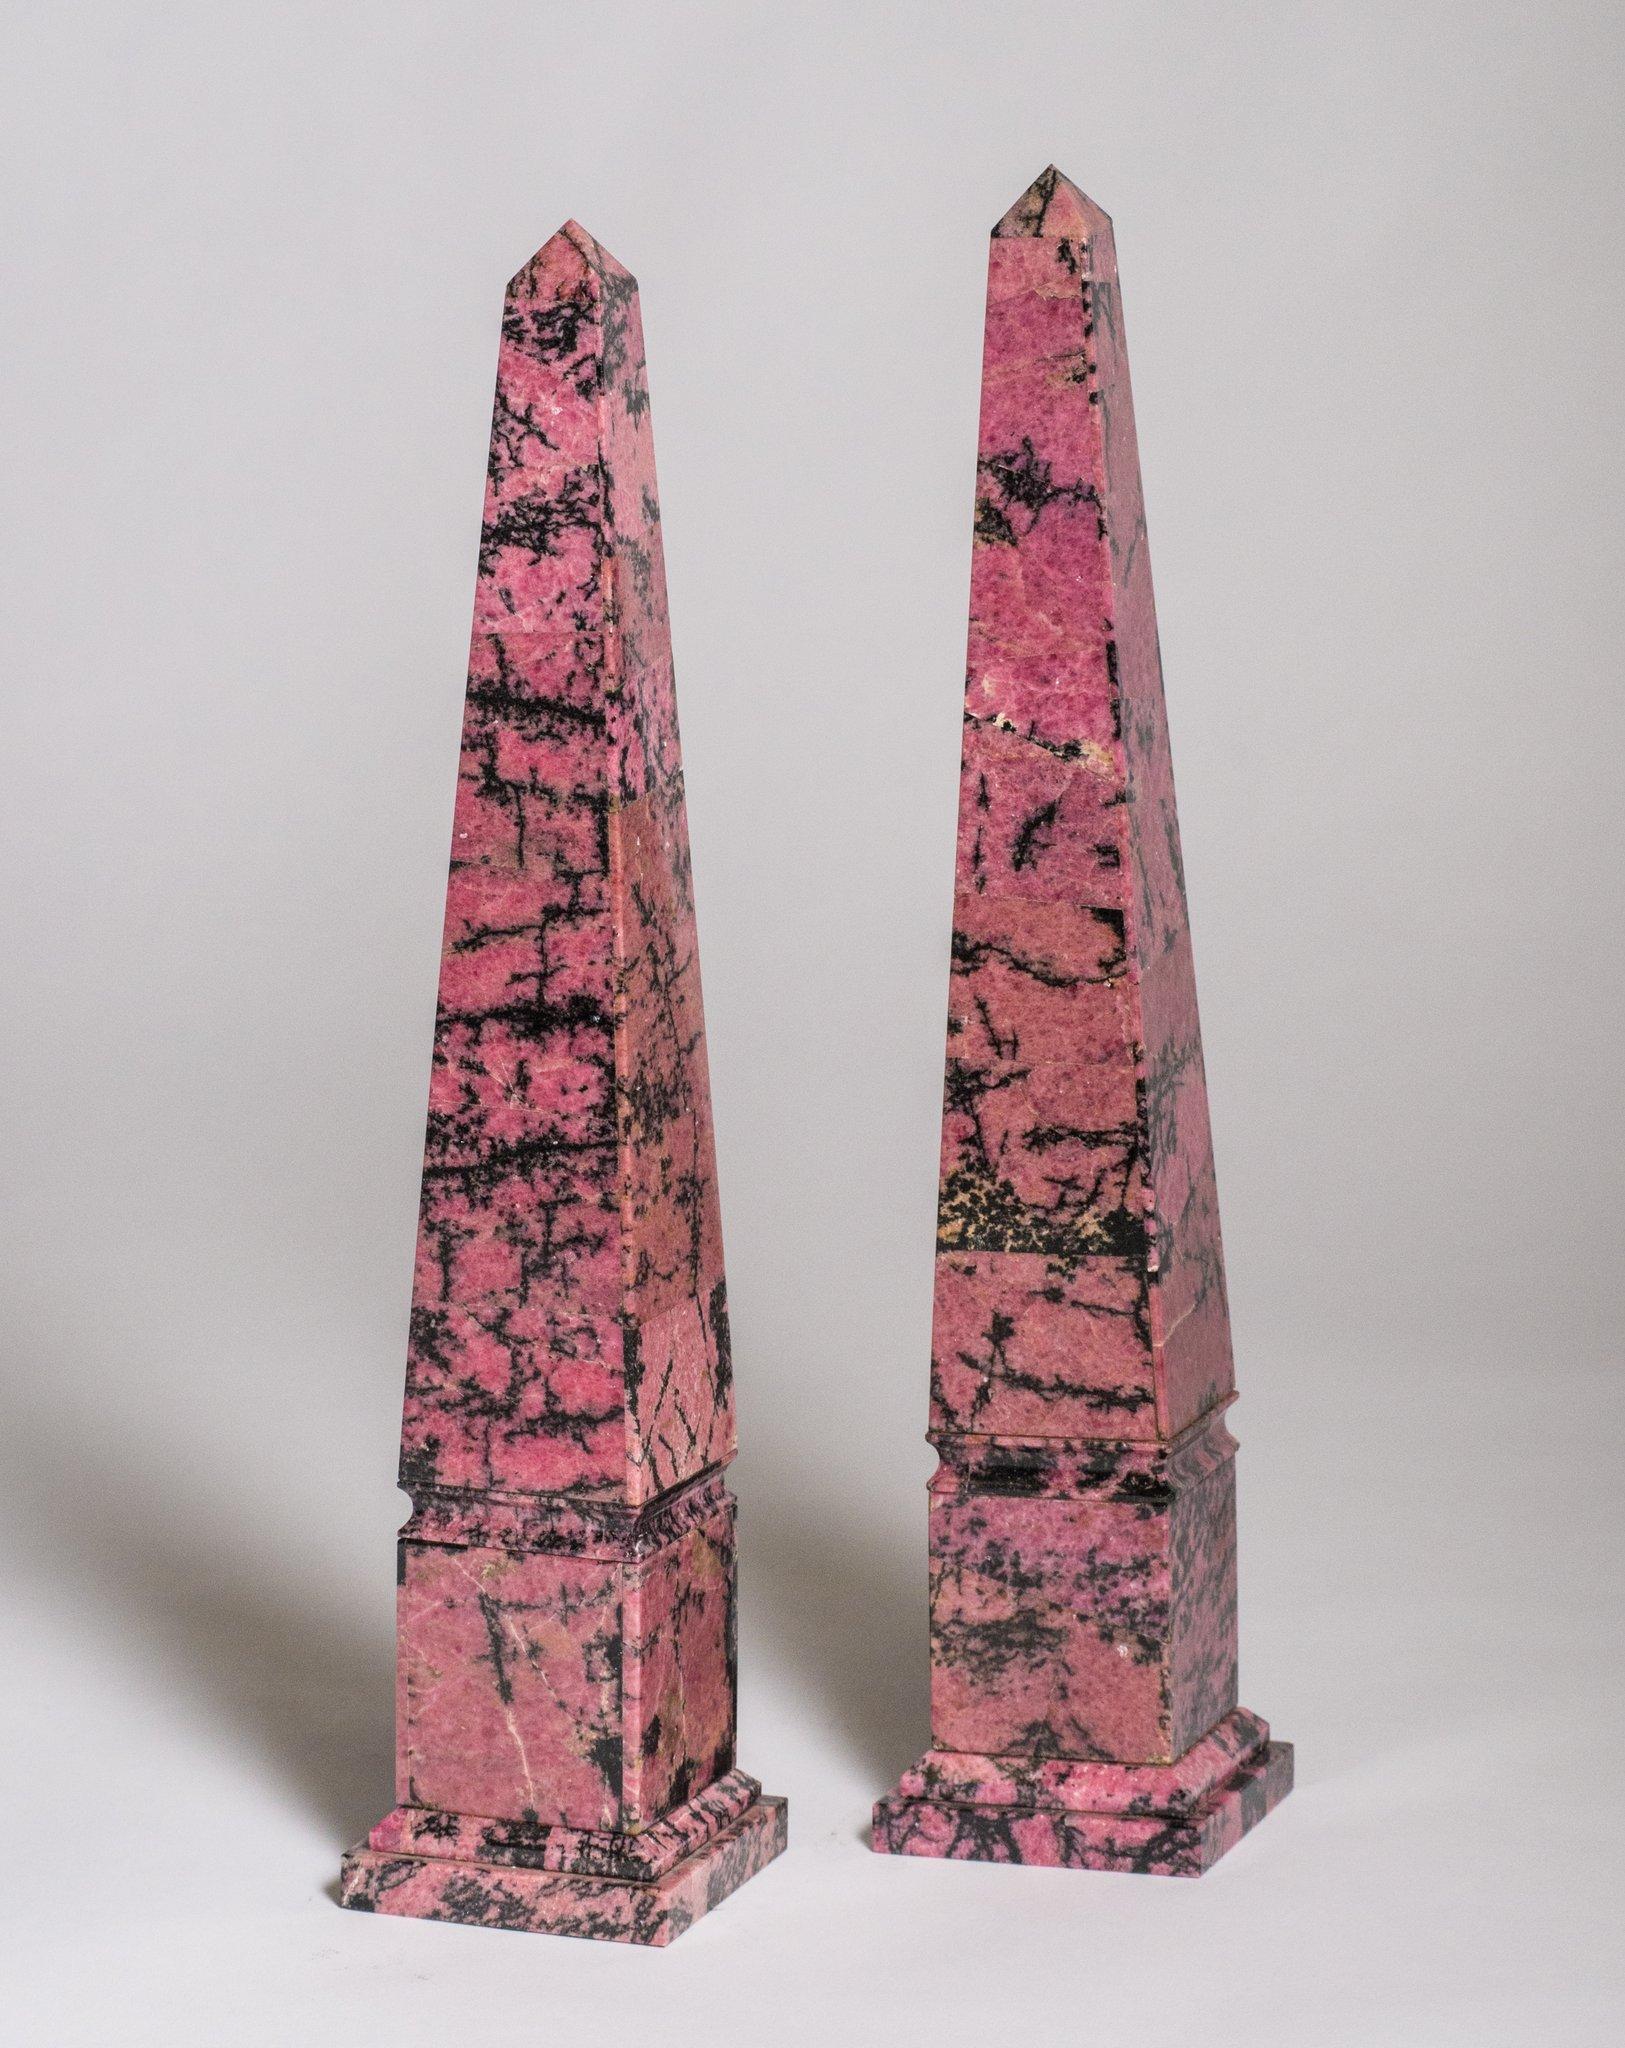 This spectacular pair of obelisks is constructed of rhodonite, a natural stone from the word rhodon, which means ‘rose’ in Greek. Like a field of flowers in full bloom and the color of sunsets, pink symbolizes unconditional love and rhodonite